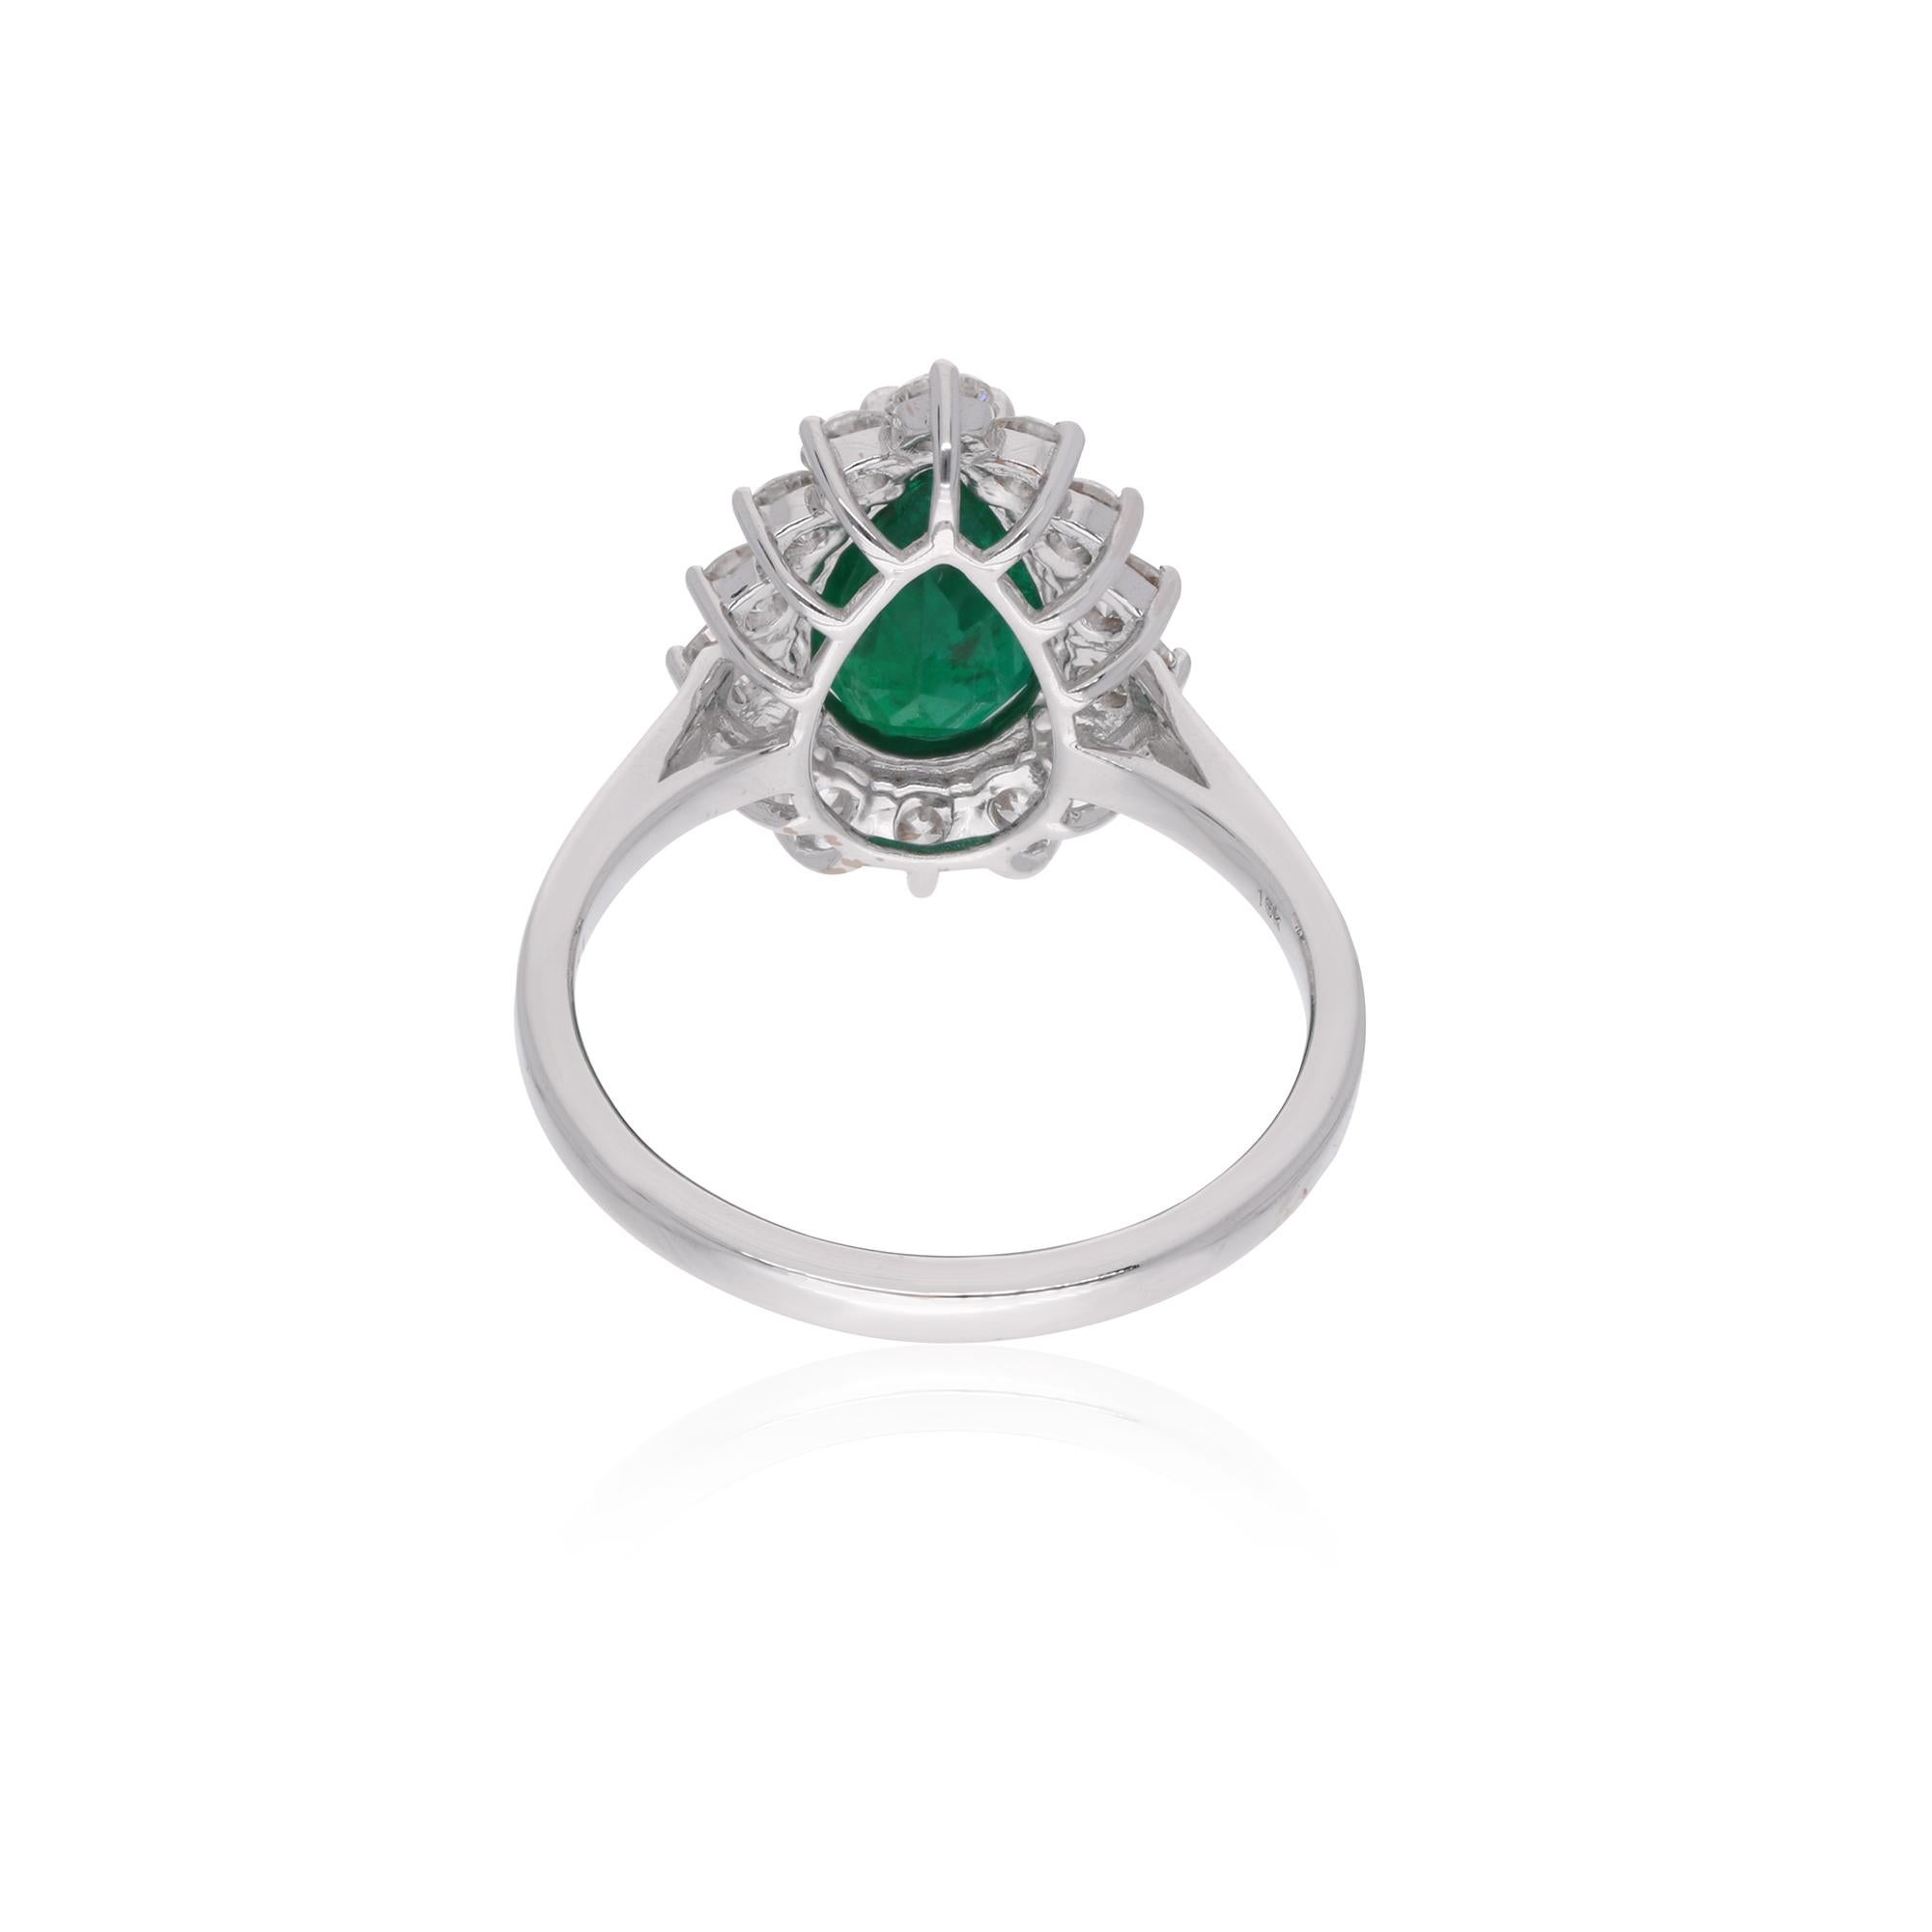 Surrounding the emerald are dazzling diamonds, meticulously selected to enhance its natural beauty and radiance. Each diamond is expertly set to maximize brilliance and sparkle, creating a halo of light that complements the emerald's